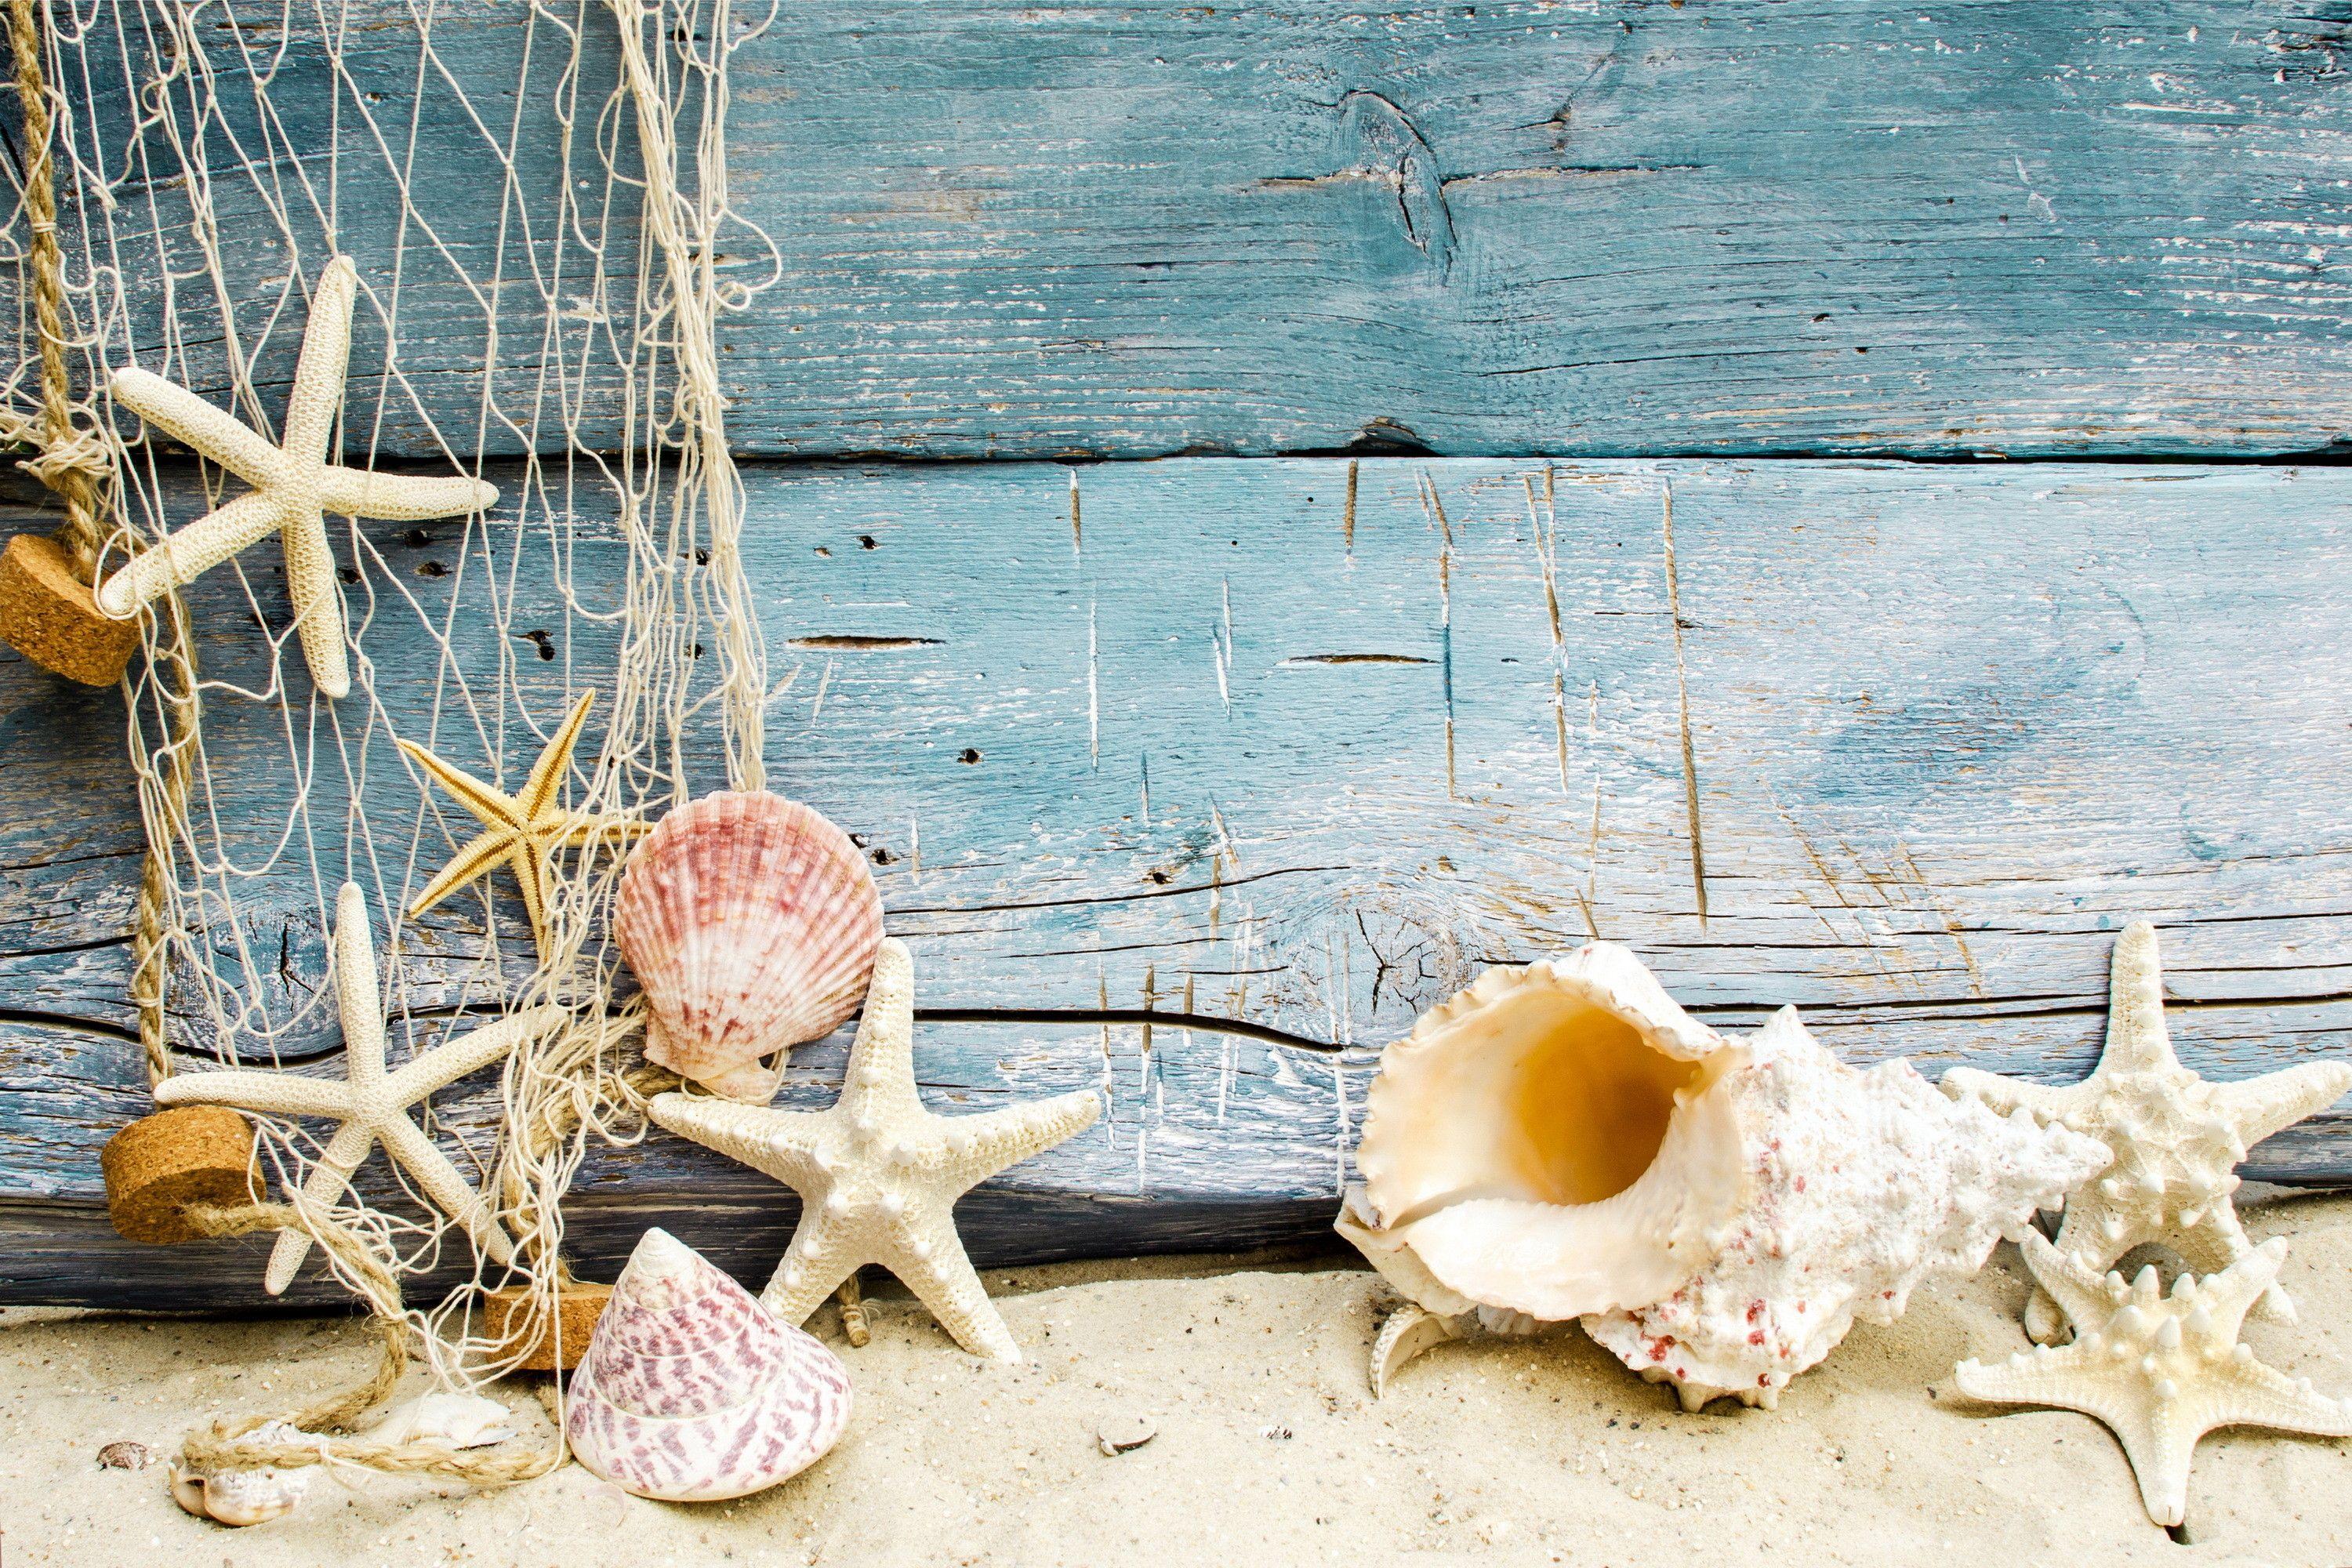 Beach/Image/Oyster Shells/Picture/Aesthetic Wallpaper/Photograph 